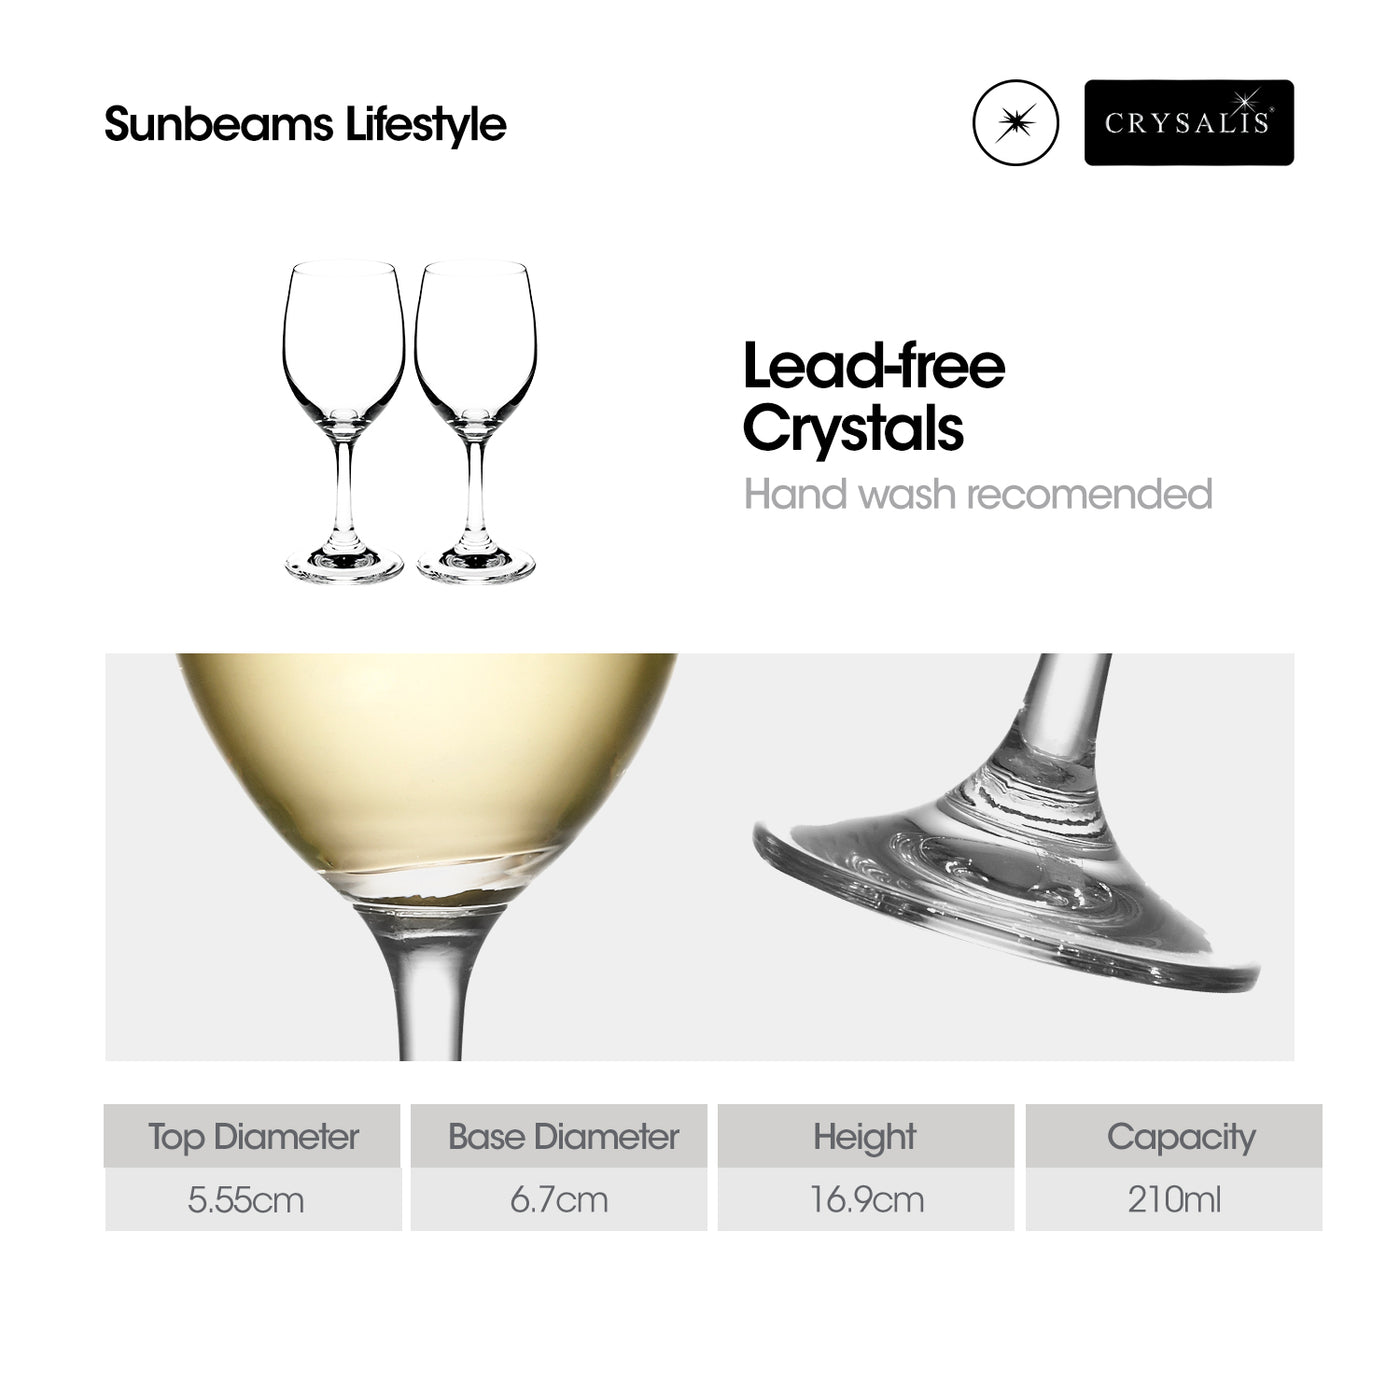 CRYSALIS Premium Lead Free Crystal Stemware White Wine Glass Cocktail Glass 210ml | Set of 2 Modern Italian Design Amazing Gift Idea For Any Occasion!